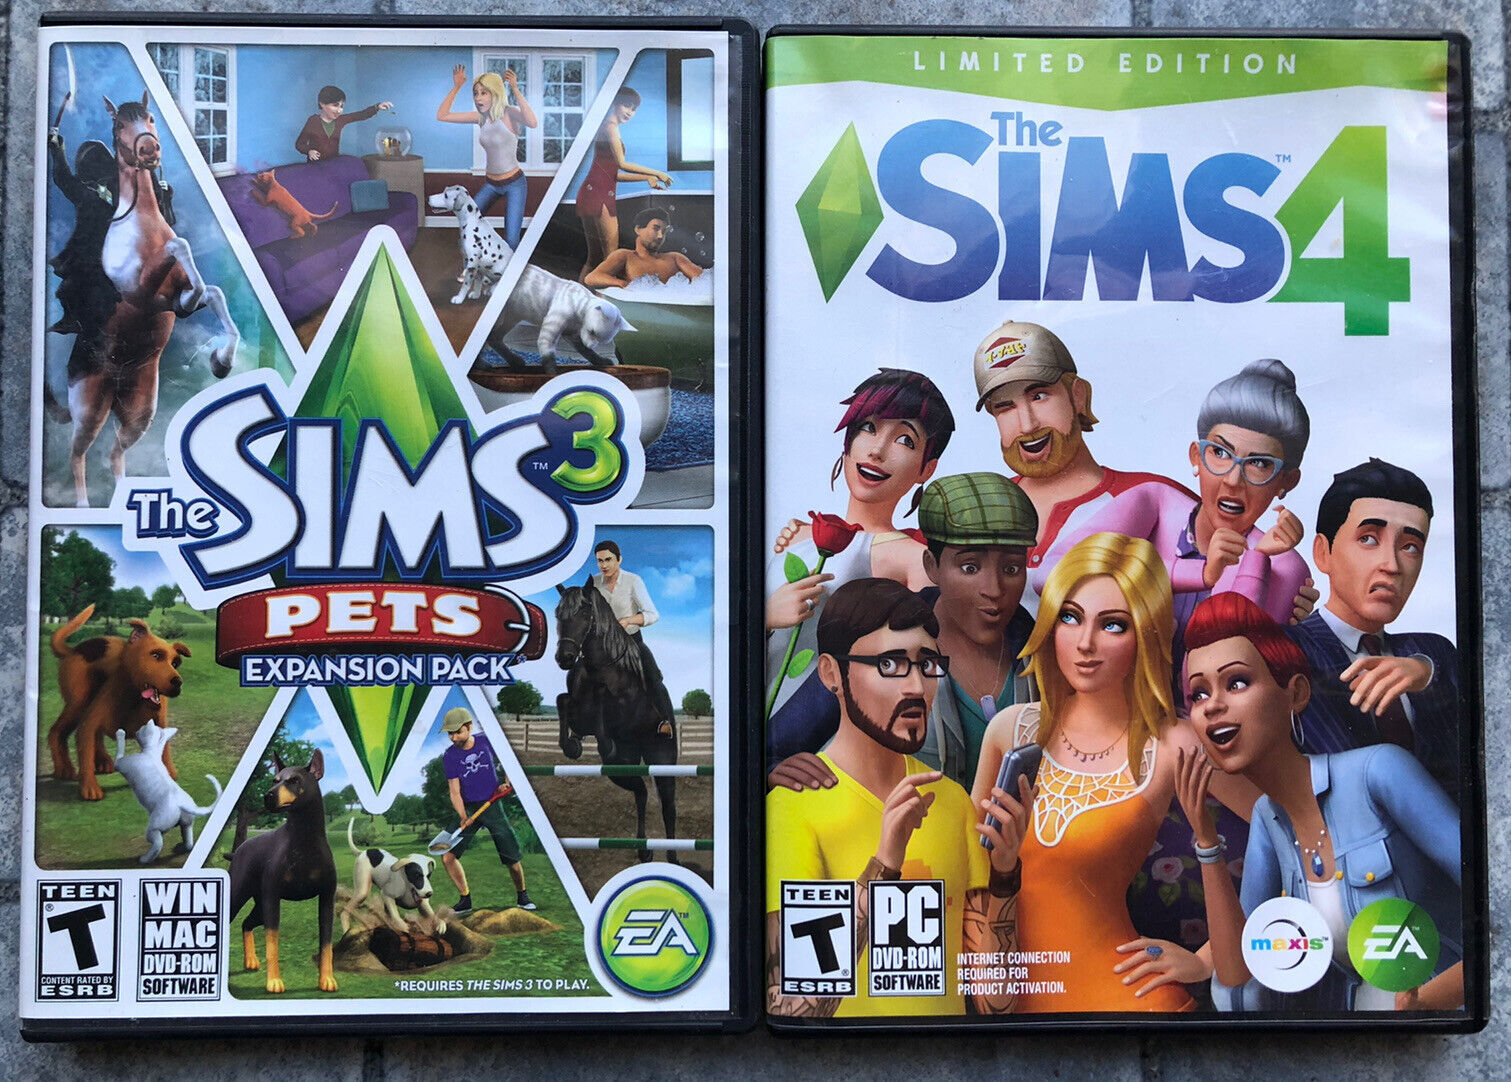 Lot Of 2 ; The Sims 4 - PC &amp; The Sims 3 Pets Expansion 14633730371 | eBay